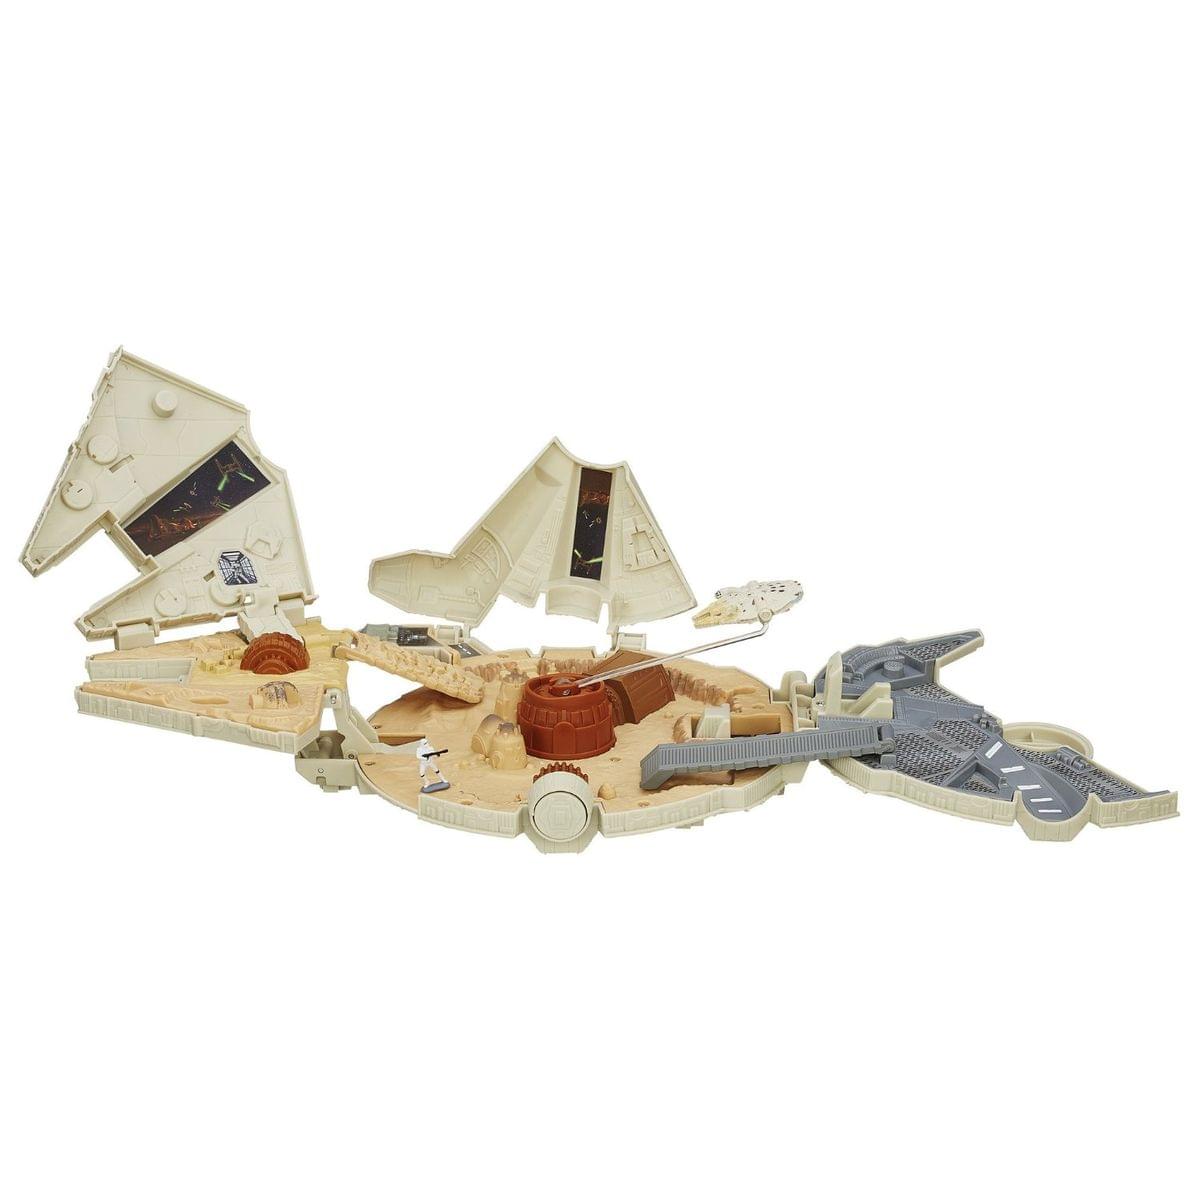 Star Wars The Force Awakens Micro Machines Millennium Falcon Playset - image 4 of 4